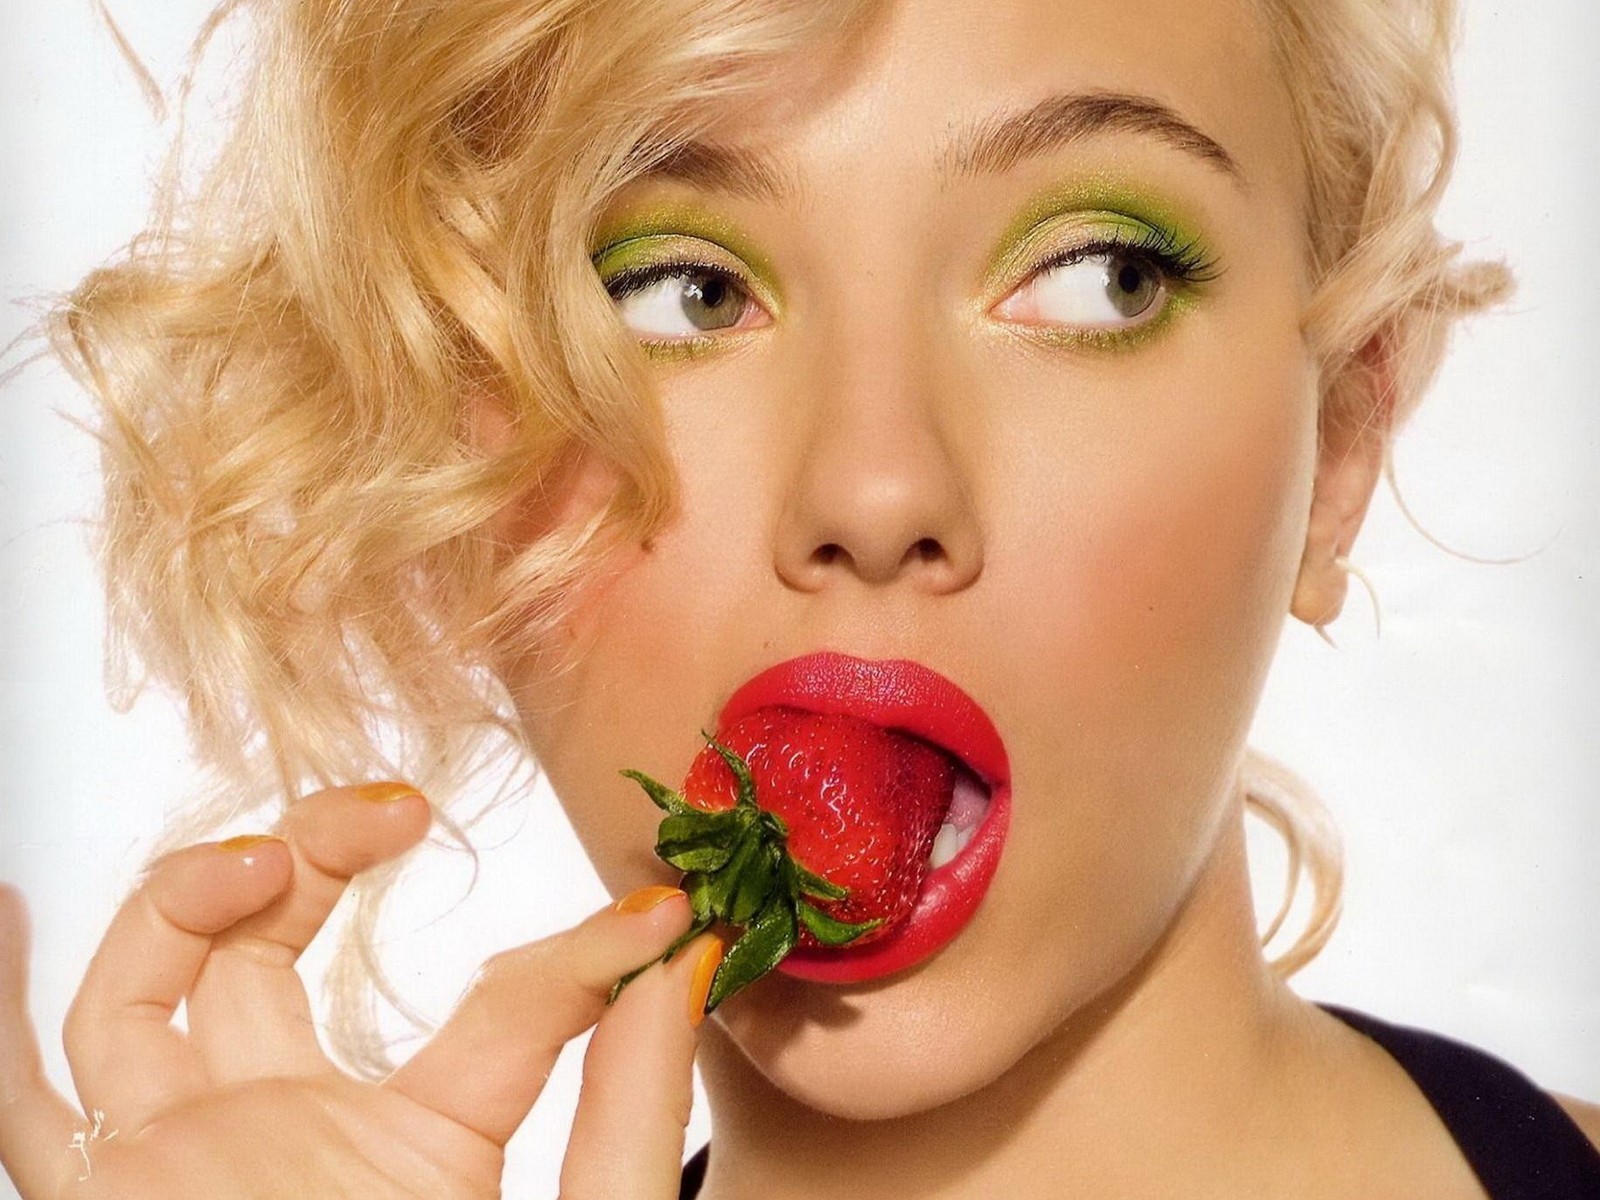 People 1600x1200 women Scarlett Johansson blonde actress red lipstick eyeshadow closeup open mouth celebrity studio white background simple background face looking away food fruit strawberries biting painted nails